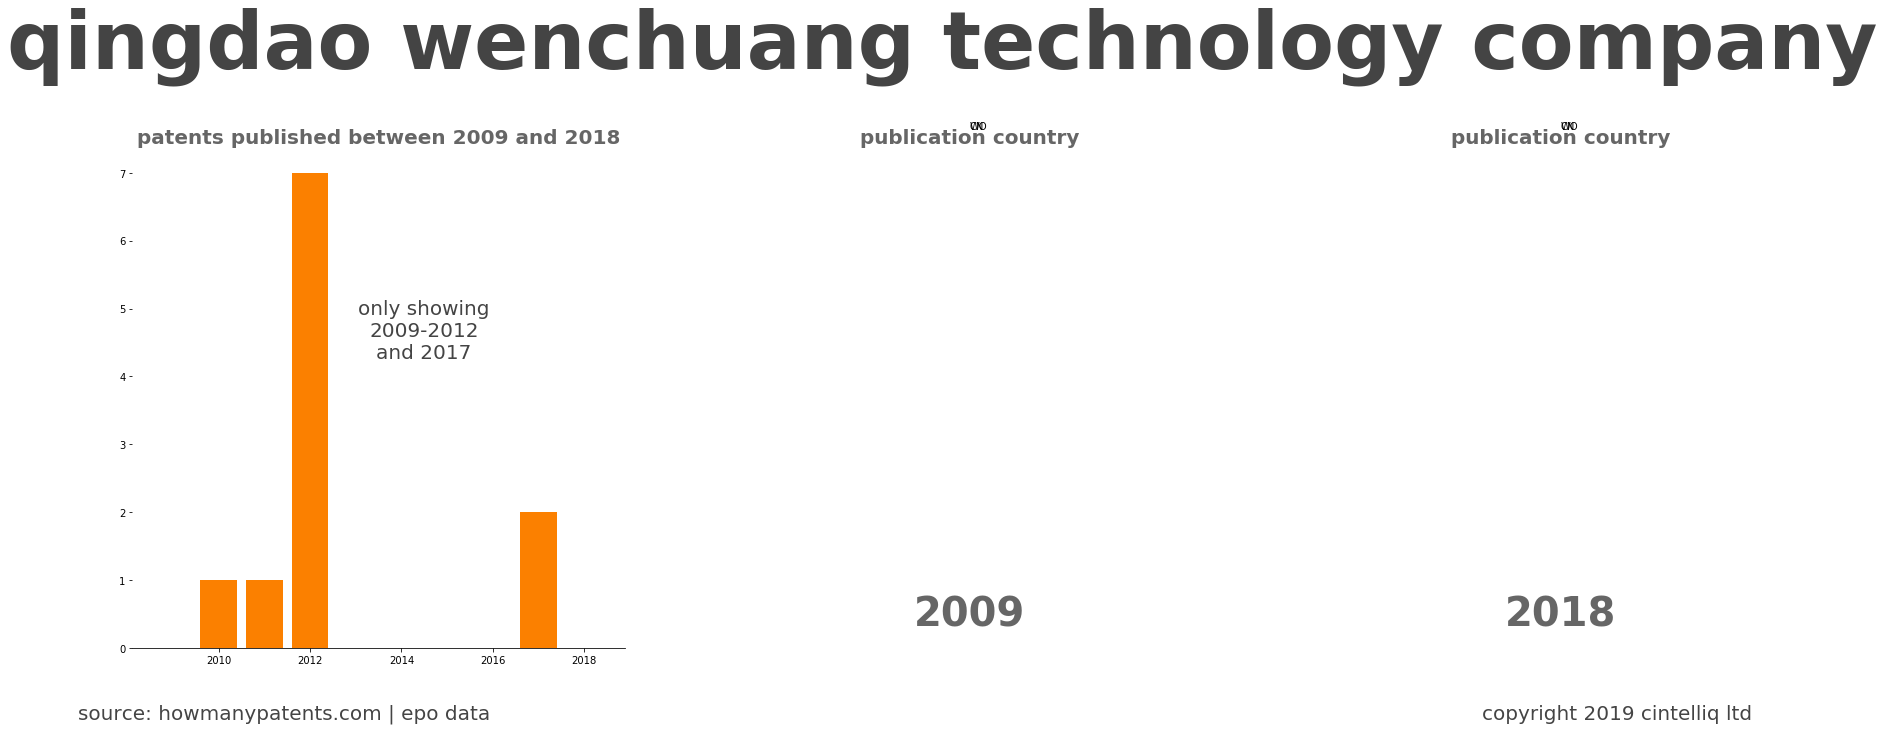 summary of patents for Qingdao Wenchuang Technology Company